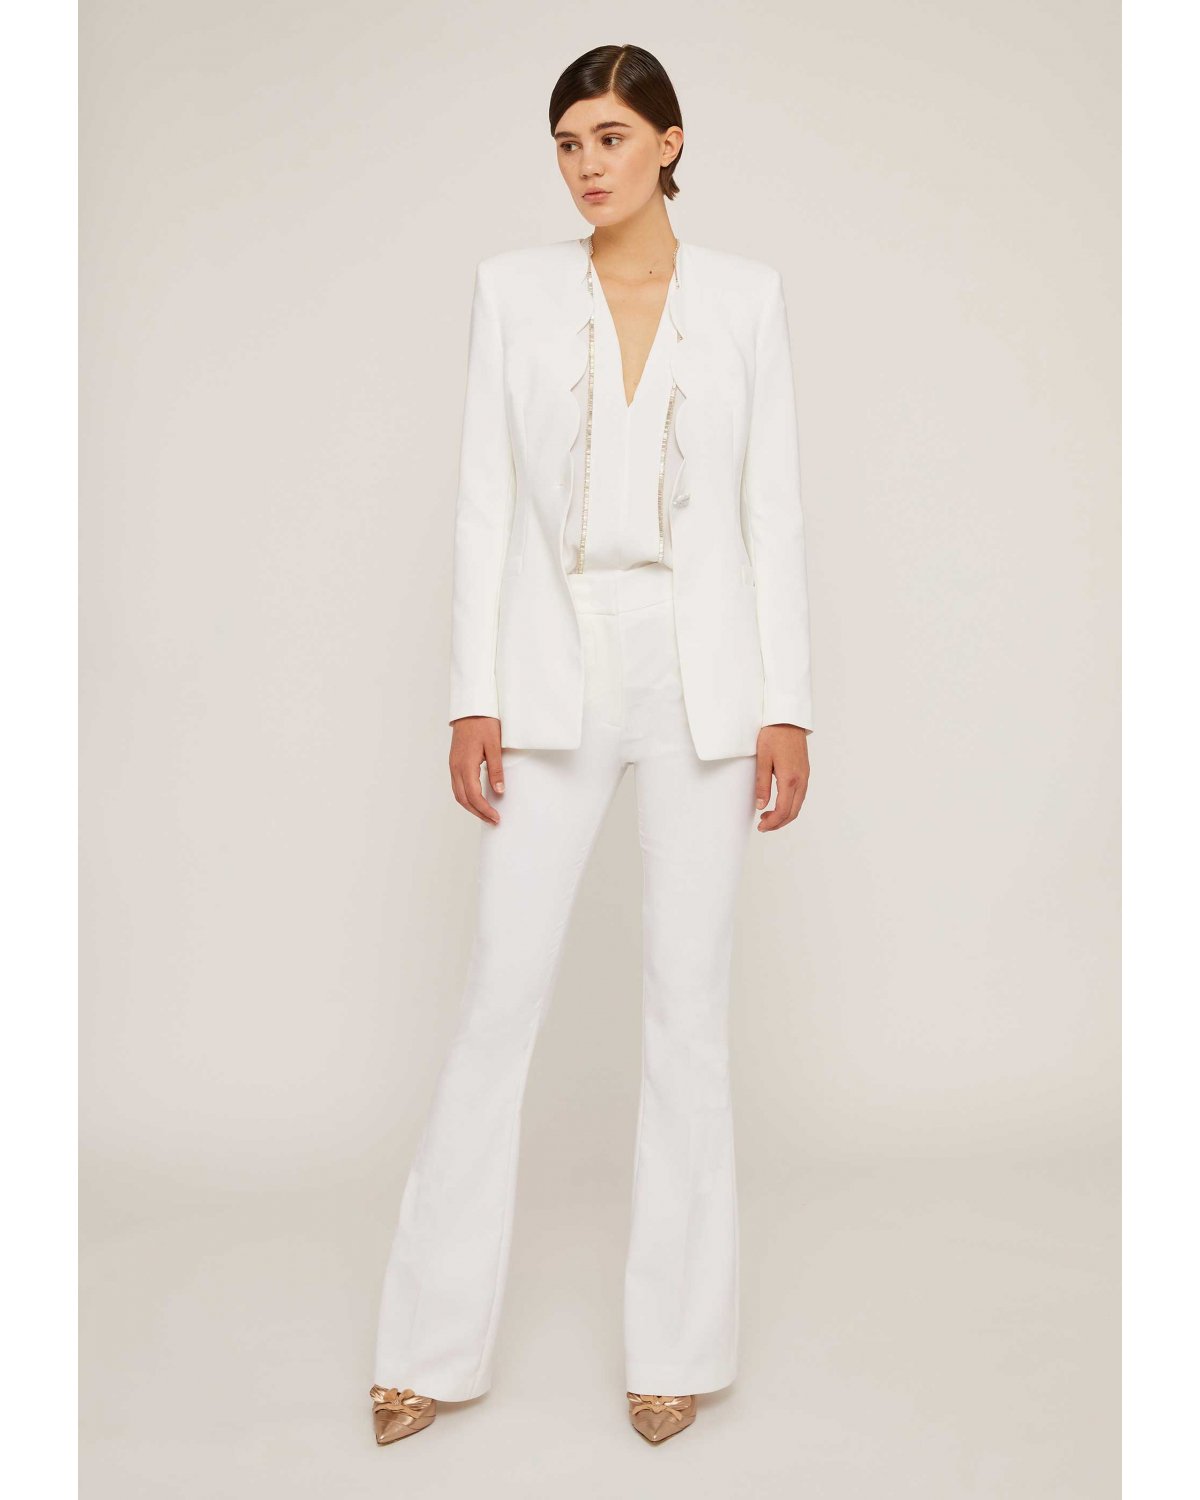 Tailored white pants | Spring Summer 2023 Collection, 73_74, Cruise 2023 Collection, Warm weather wear, Ready to Wear, New Arrivals, Spring suits, Mother's Day | Genny